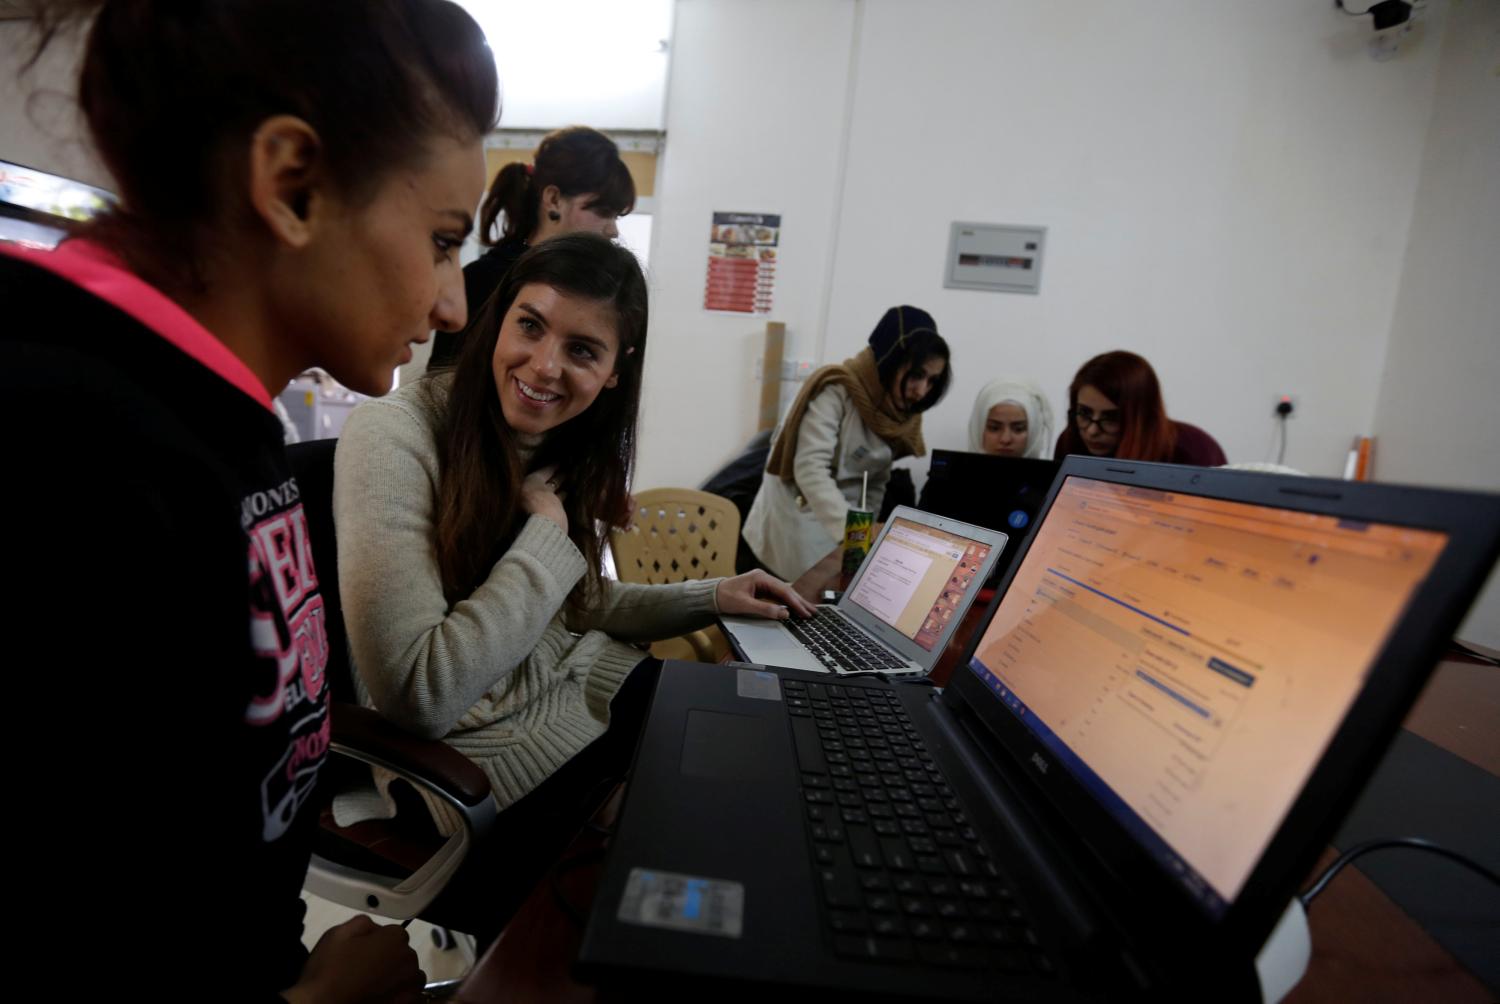 Syrian refugees and displaced Iraqis attend their class to learn basic and advanced coding skills at Re:Coded boot camp, in Erbil